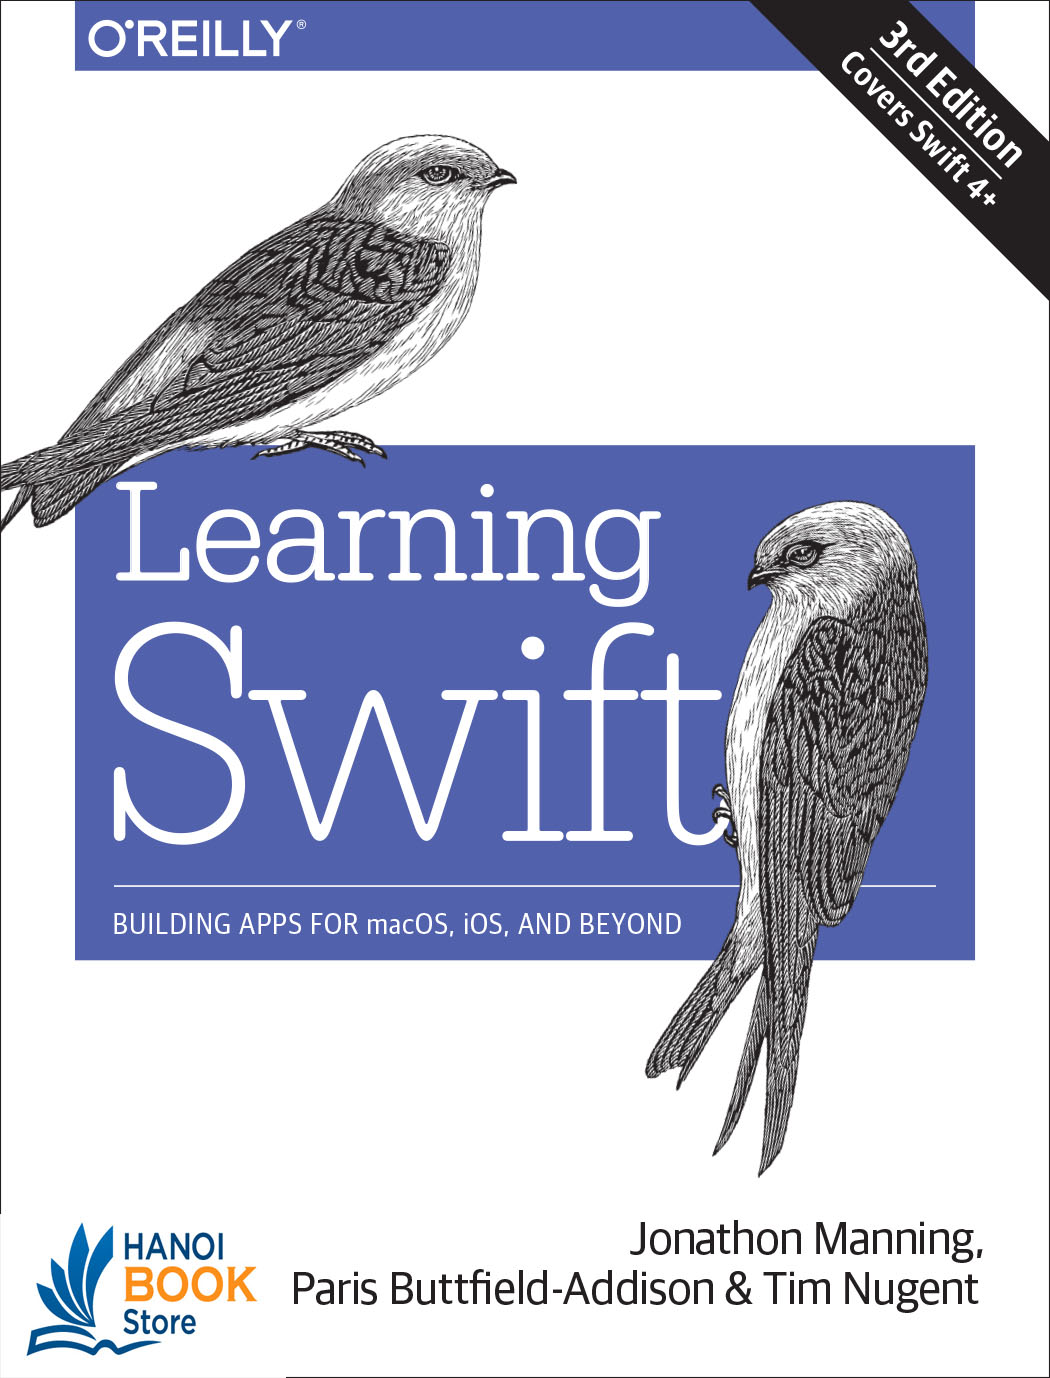 Learning Swift Building Apps for macOS, iOS, and Beyond